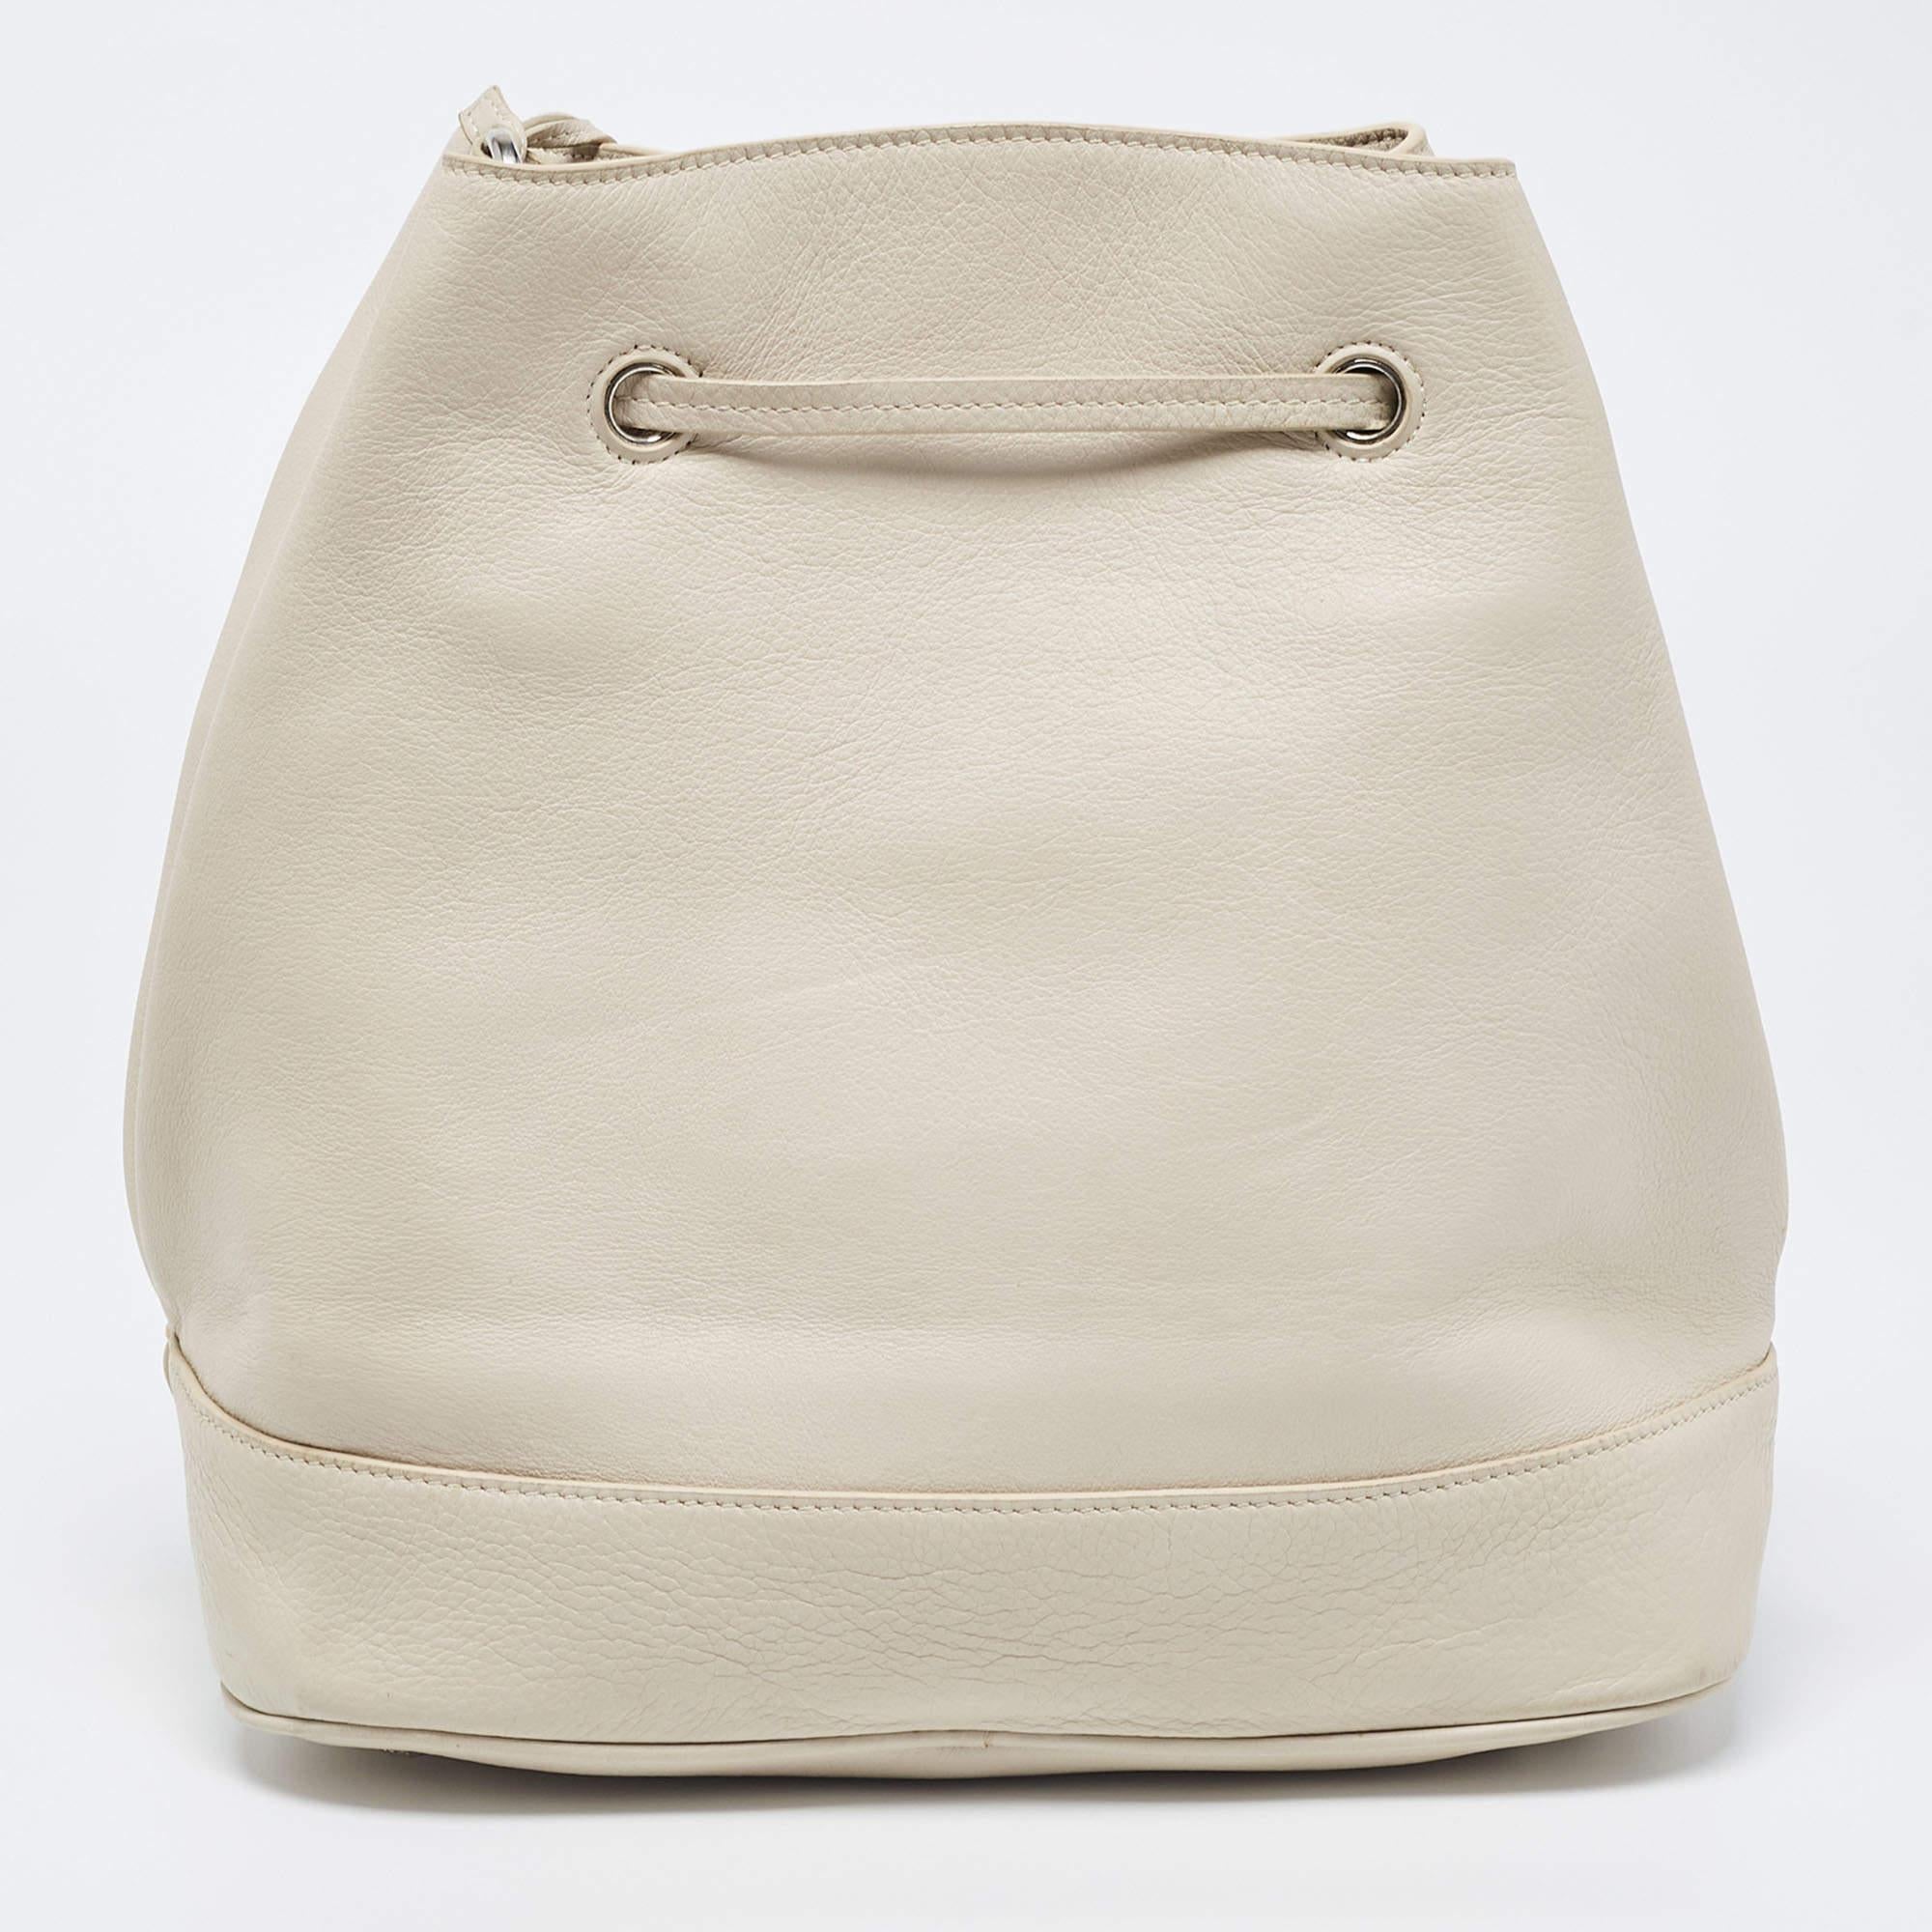 Feel confident and beautiful every time you carry this bucket bag from Prada. Crafted from off-white leather, this bag offers utmost practicality. It features a shoulder strap and a drawstring closure that secures a well-sized interior.


Includes: